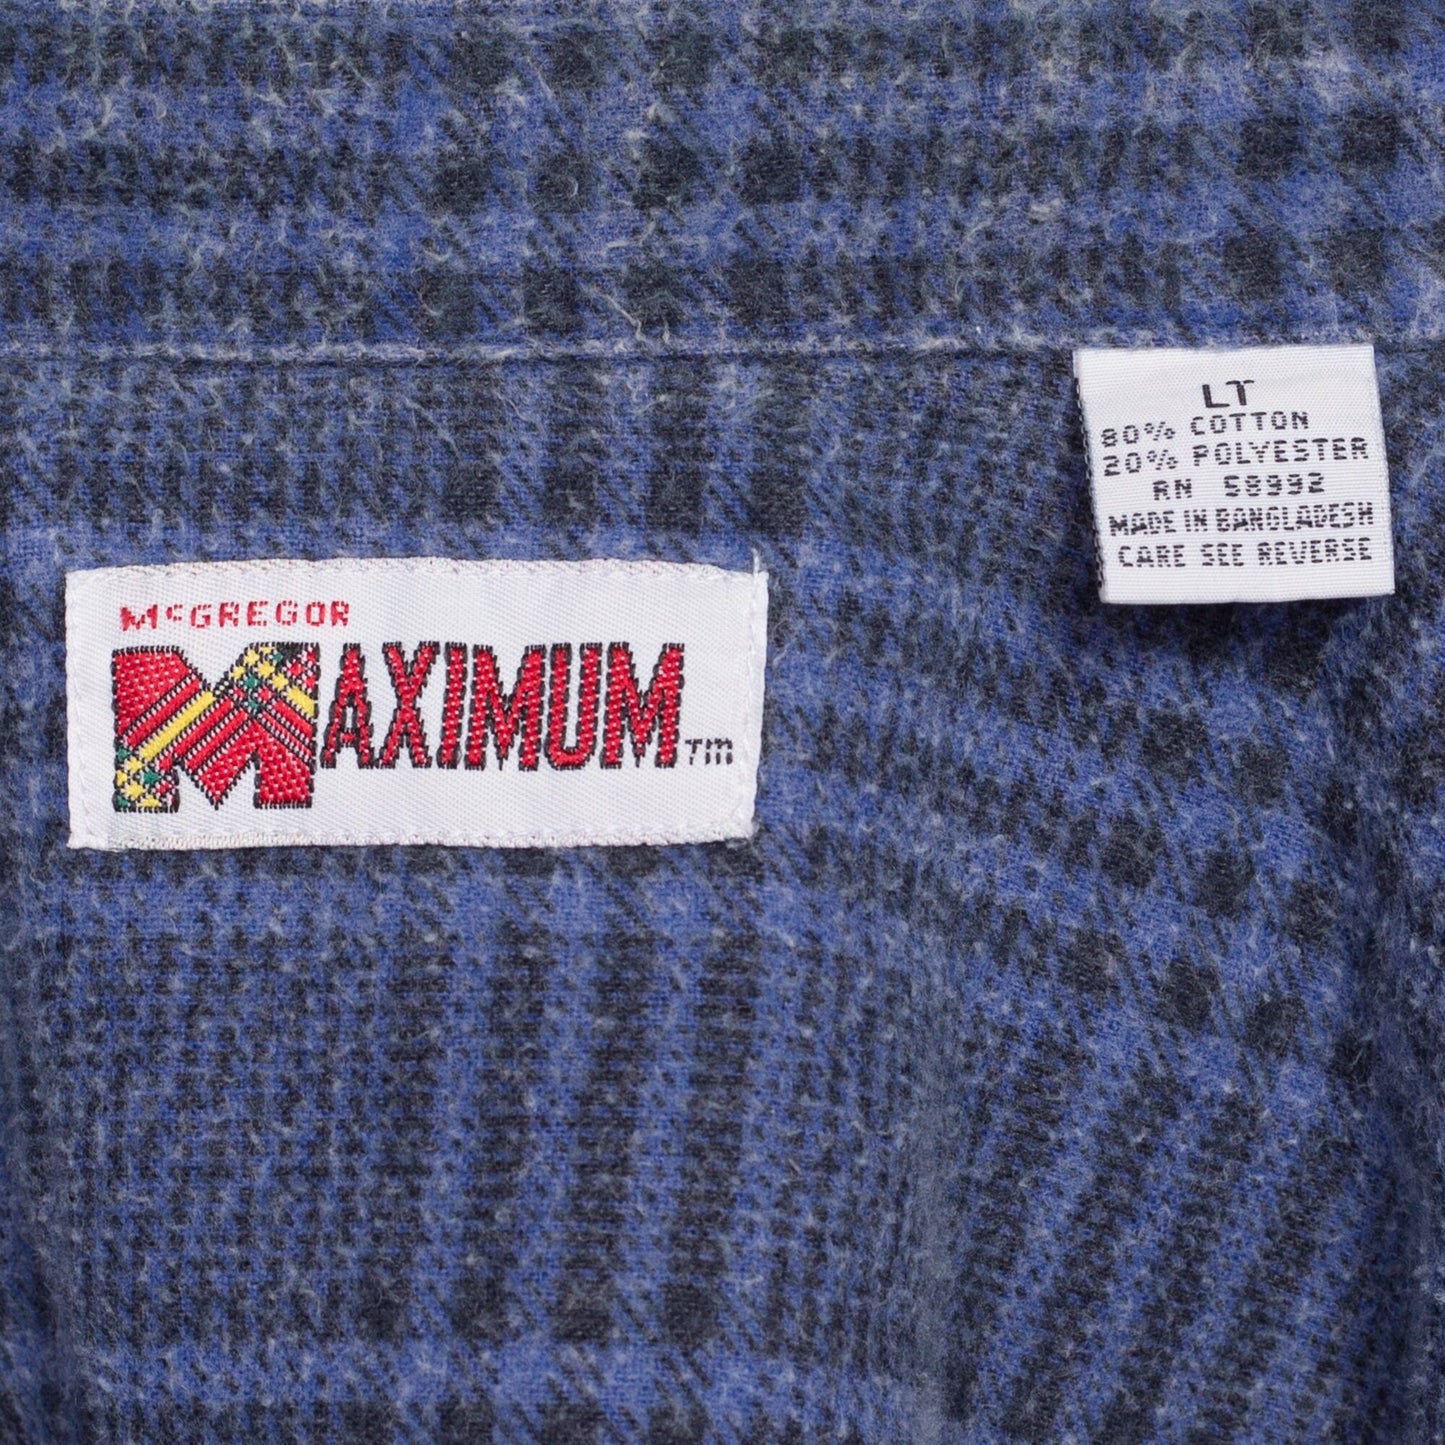 L| 90s Blue Plaid Flannel Shirt - Men's Large Tall | Vintage Grunge Button Up Long Sleeve Collared Top